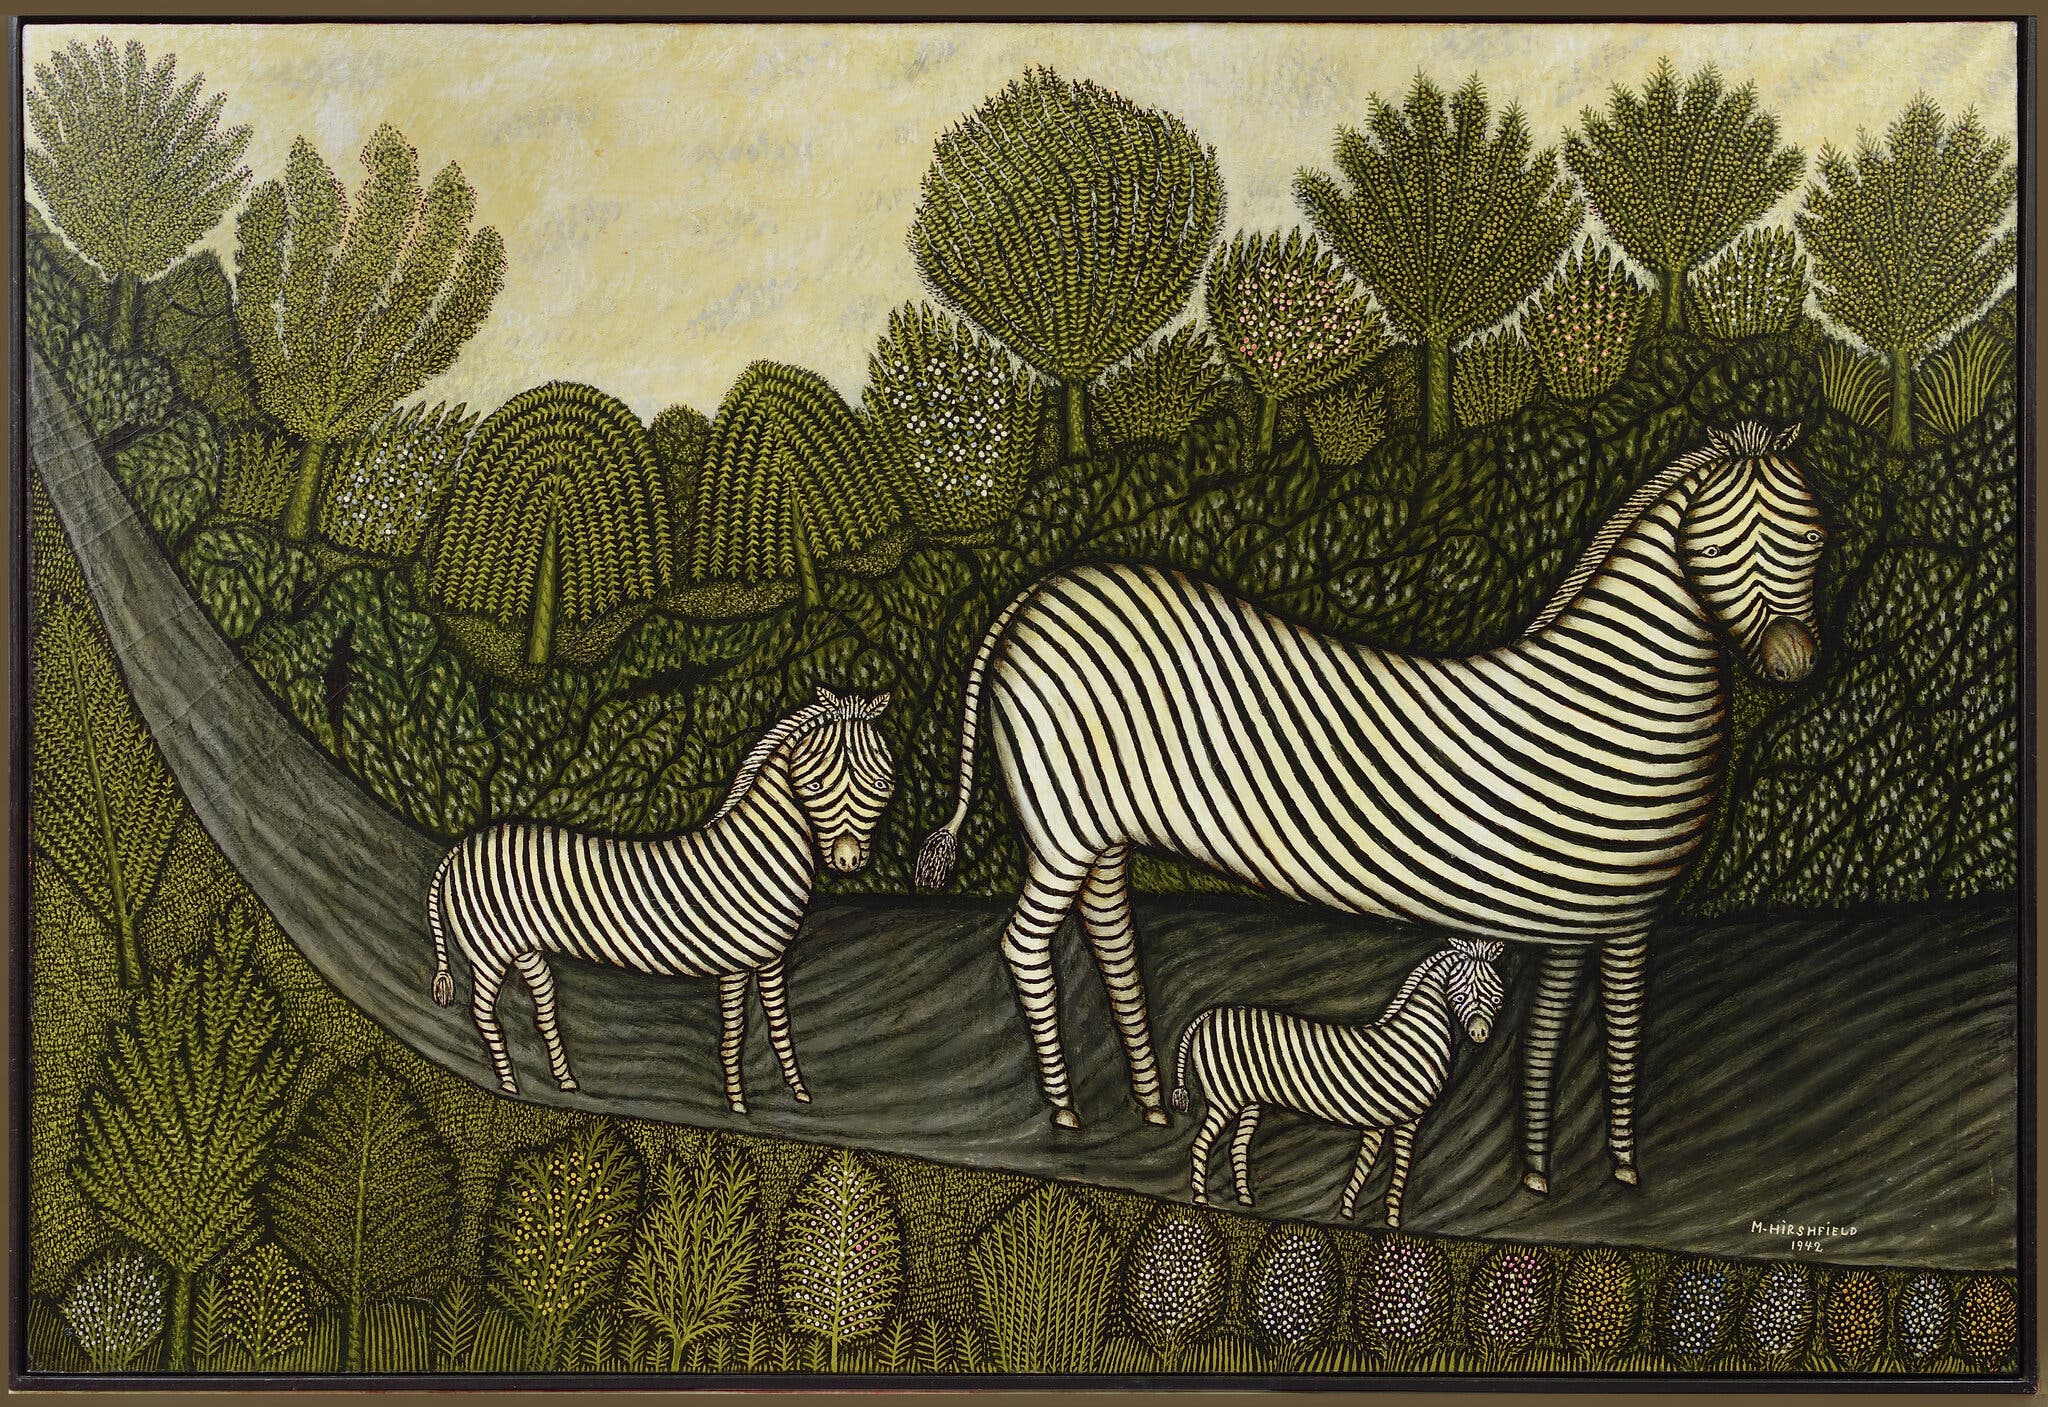 Zebra Family by Morris Hirshfield - 1942 private collection